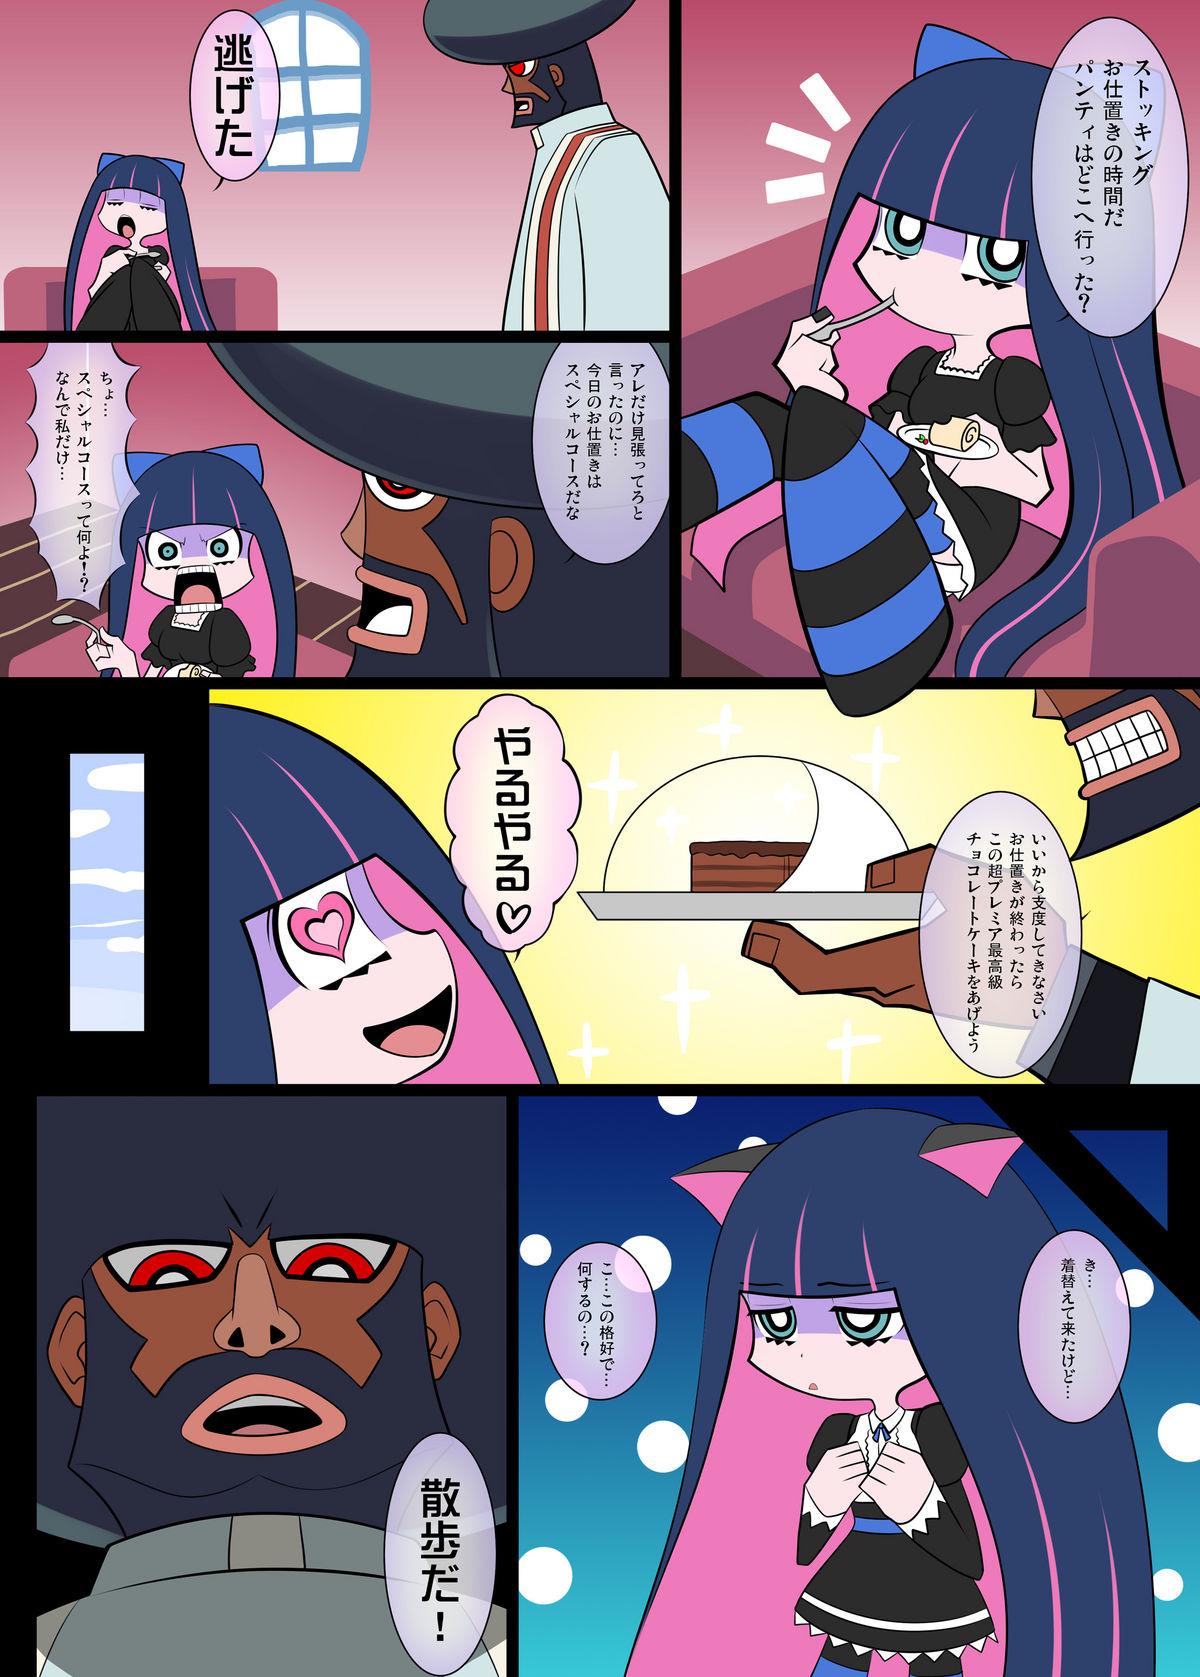 Tiny Titties Sperma & Sweets with Villager - Panty and stocking with garterbelt Kissing - Page 3